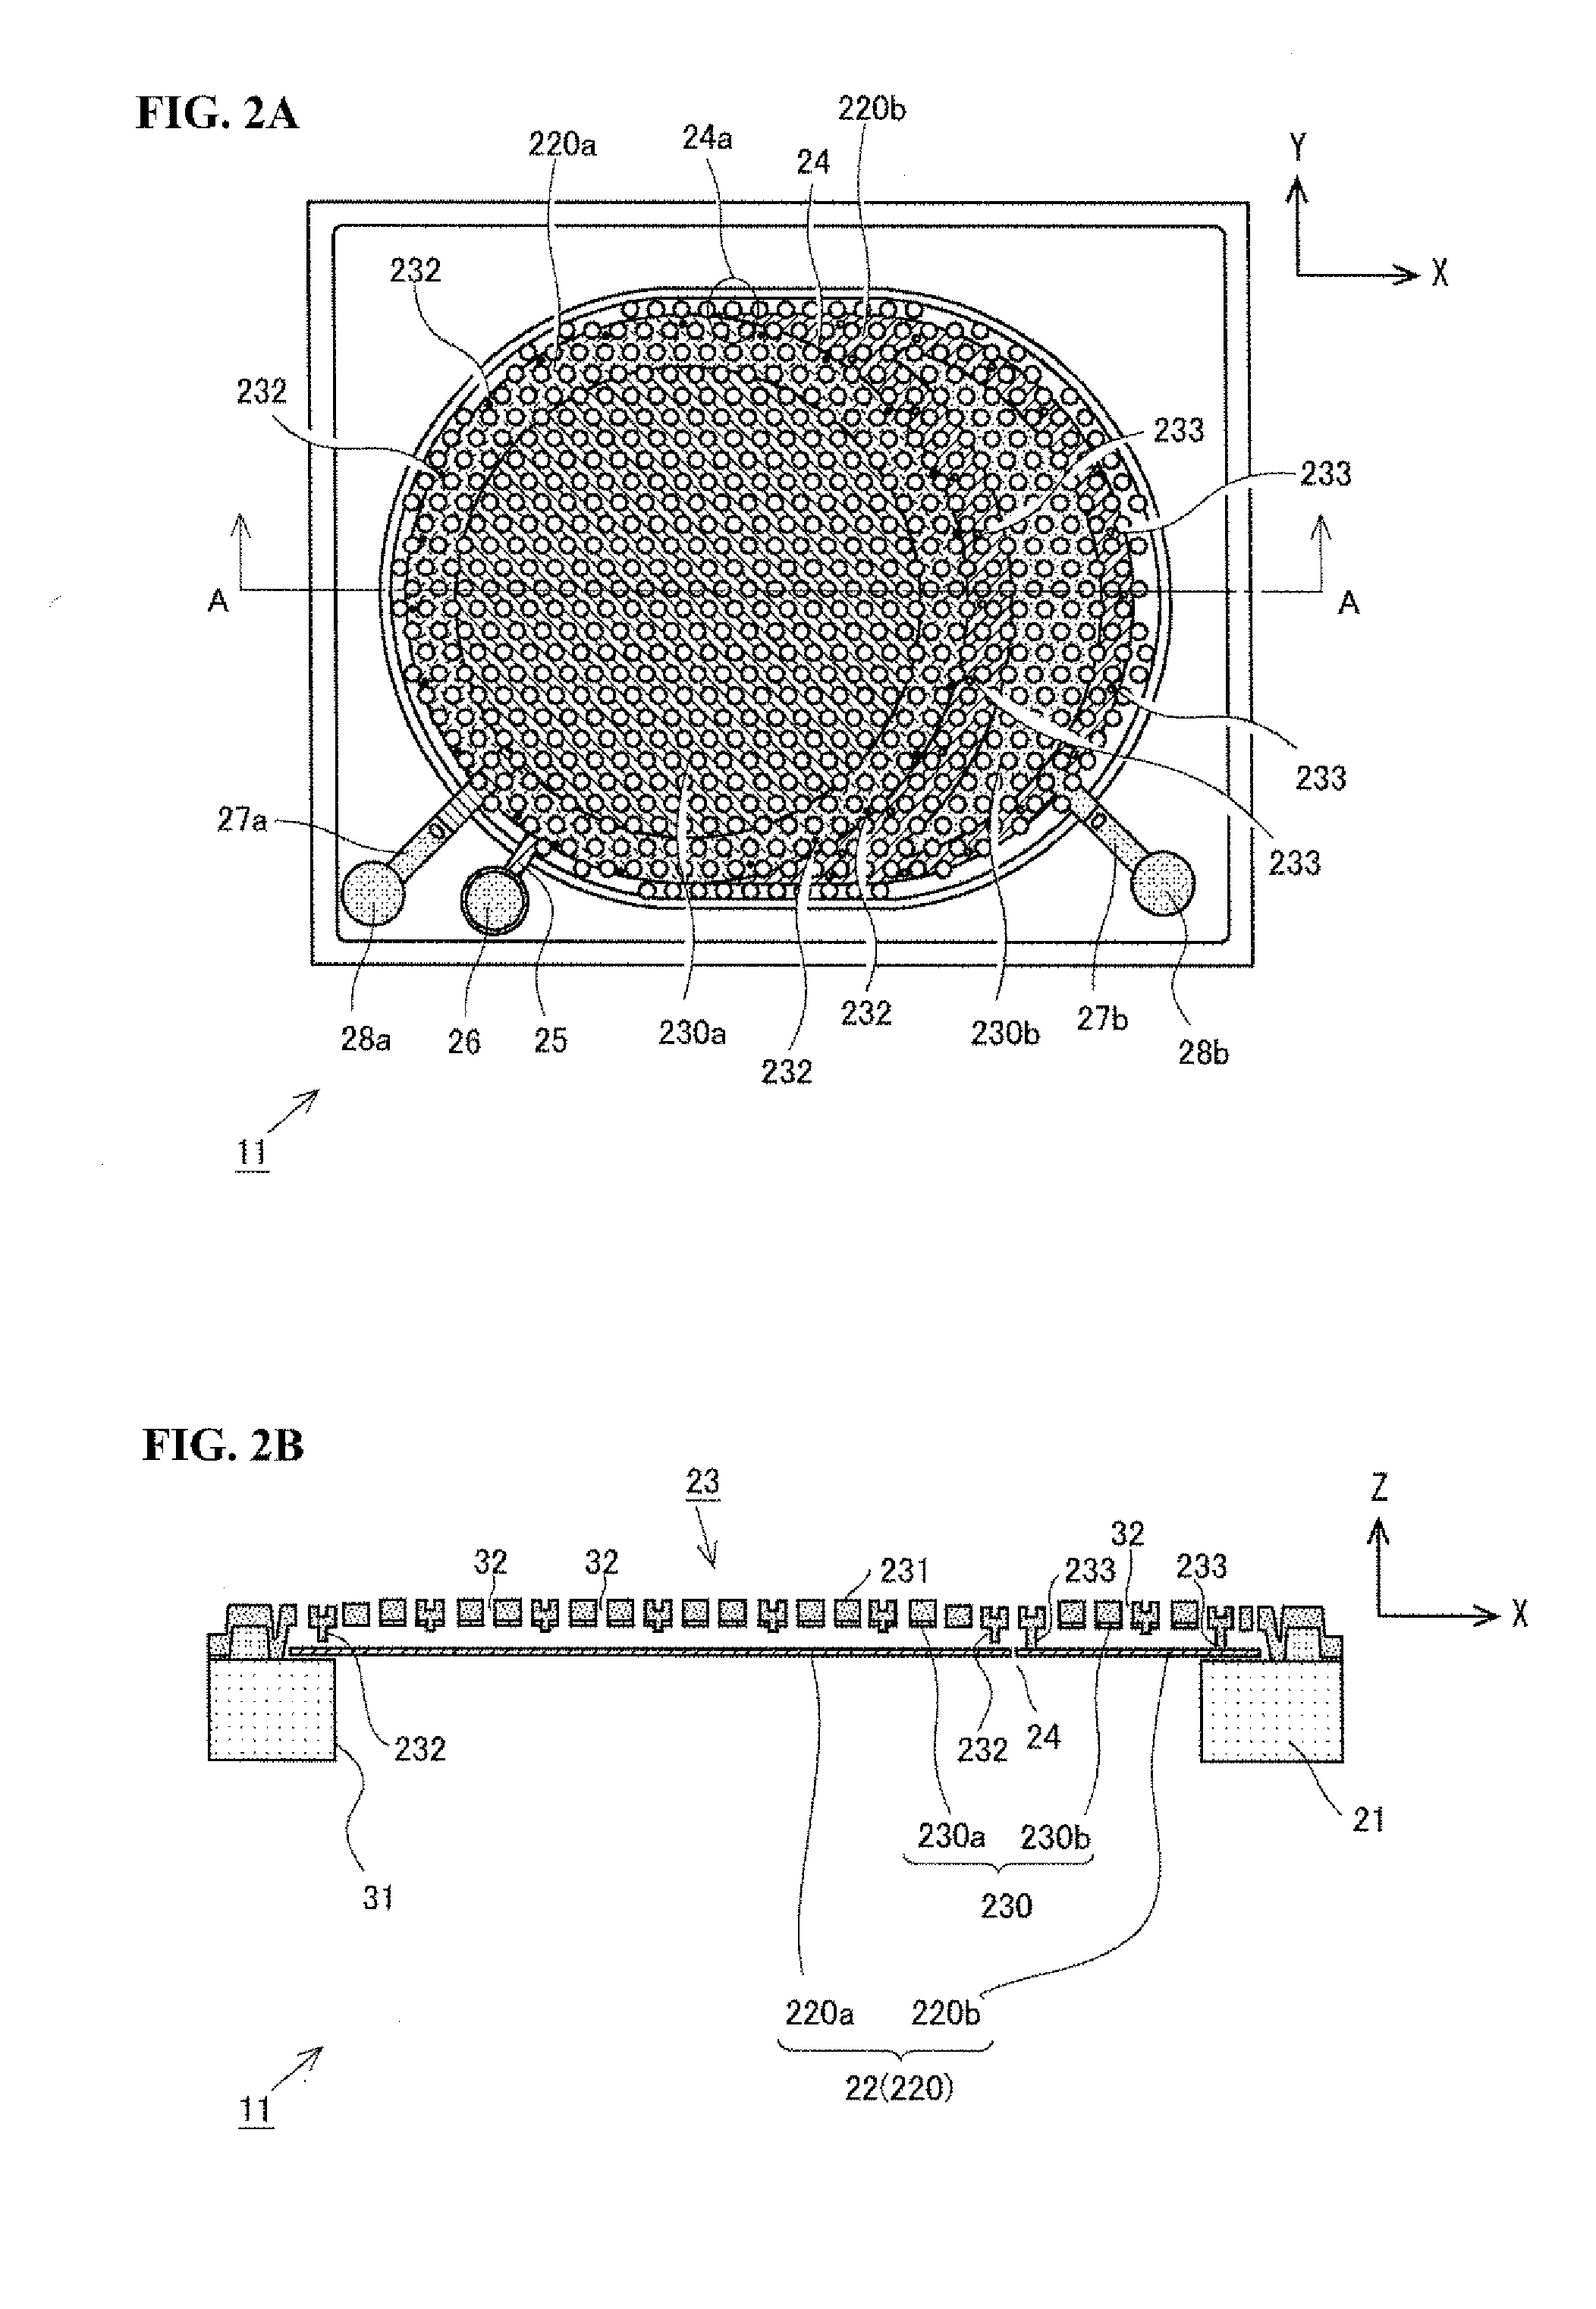 Acoustic transducer and microphone